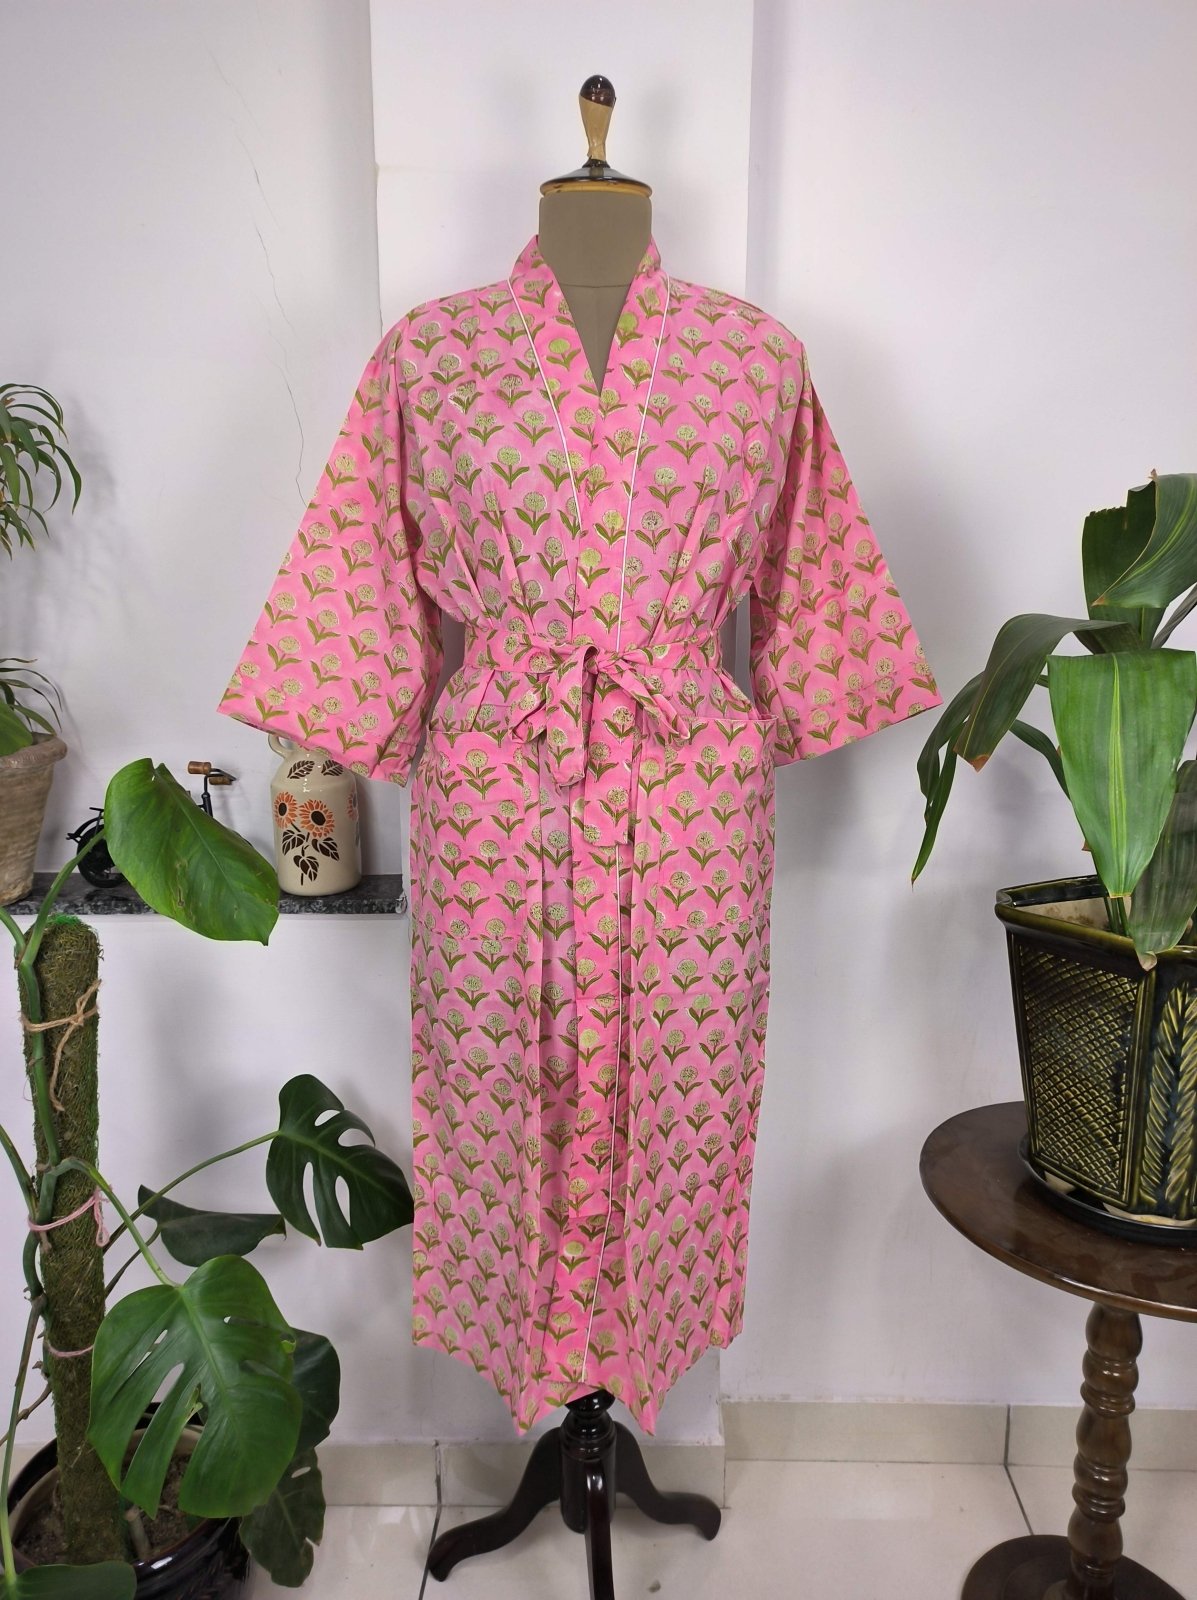 Boho House Robe Indian Handprinted Cotton Kimono Pink Yellow Floral | Perfect for Summer Luxury Beach Holidays Yacht Cover Up Stunning Dress - The Eastern Loom